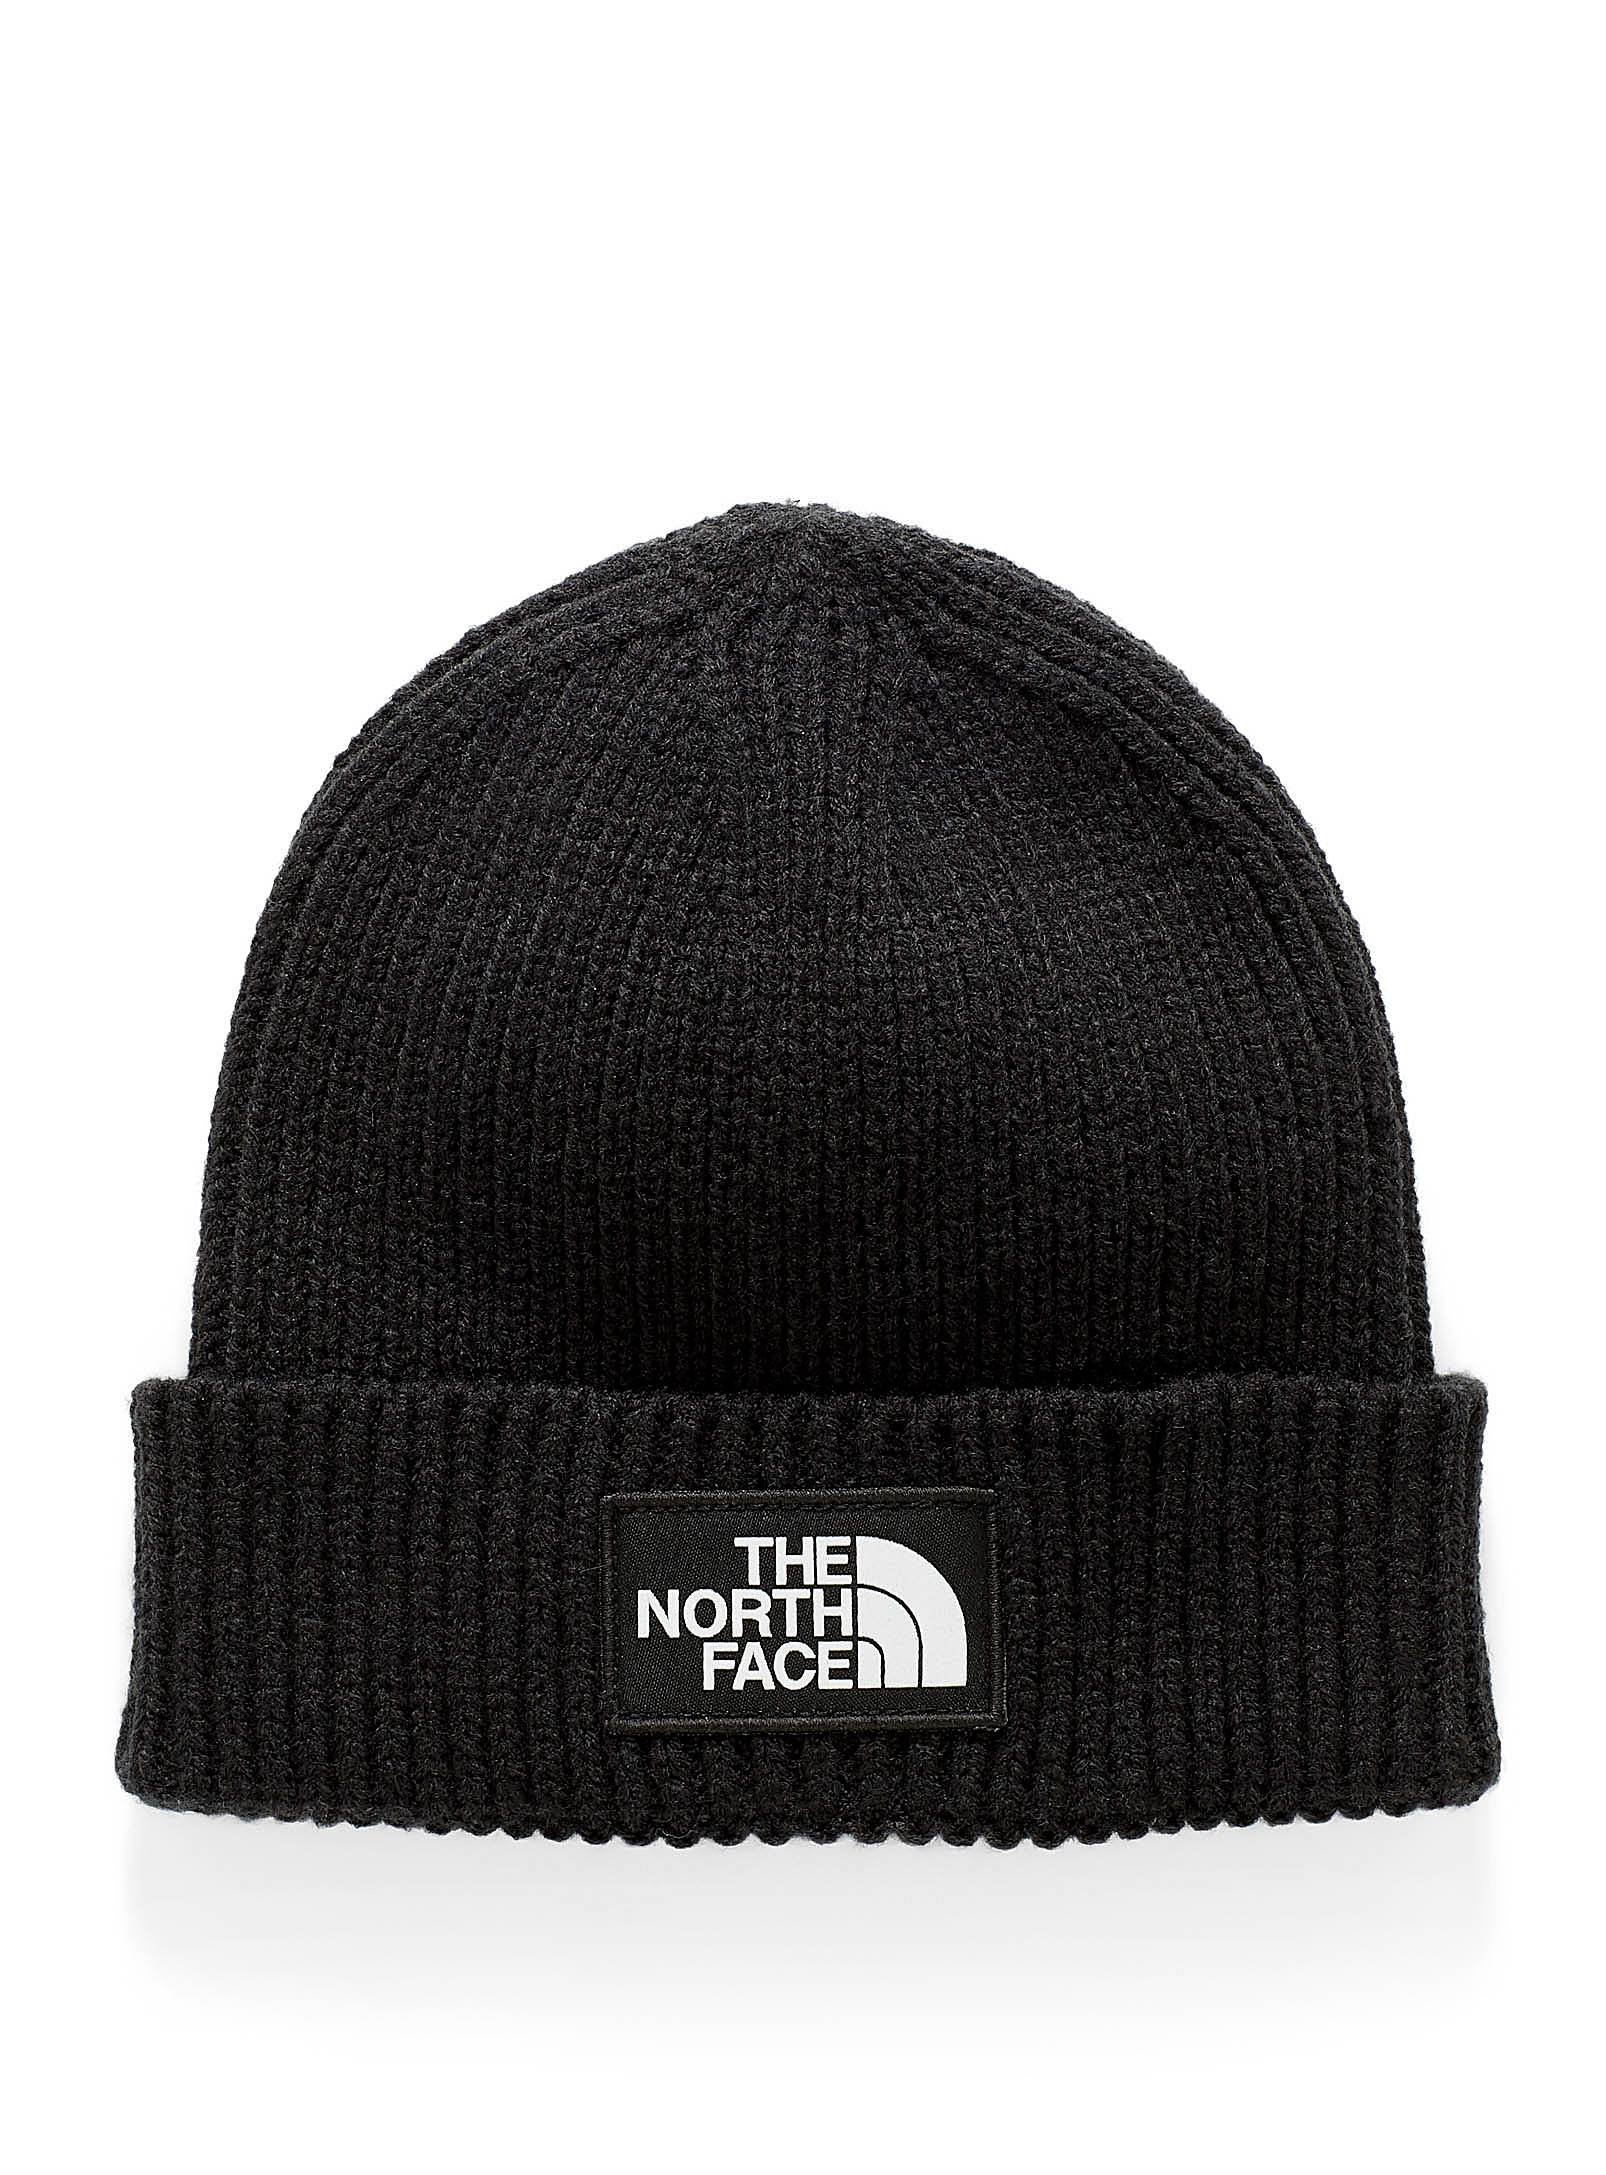 The North Face - Women's Ribbed knit logo Tuque Hat